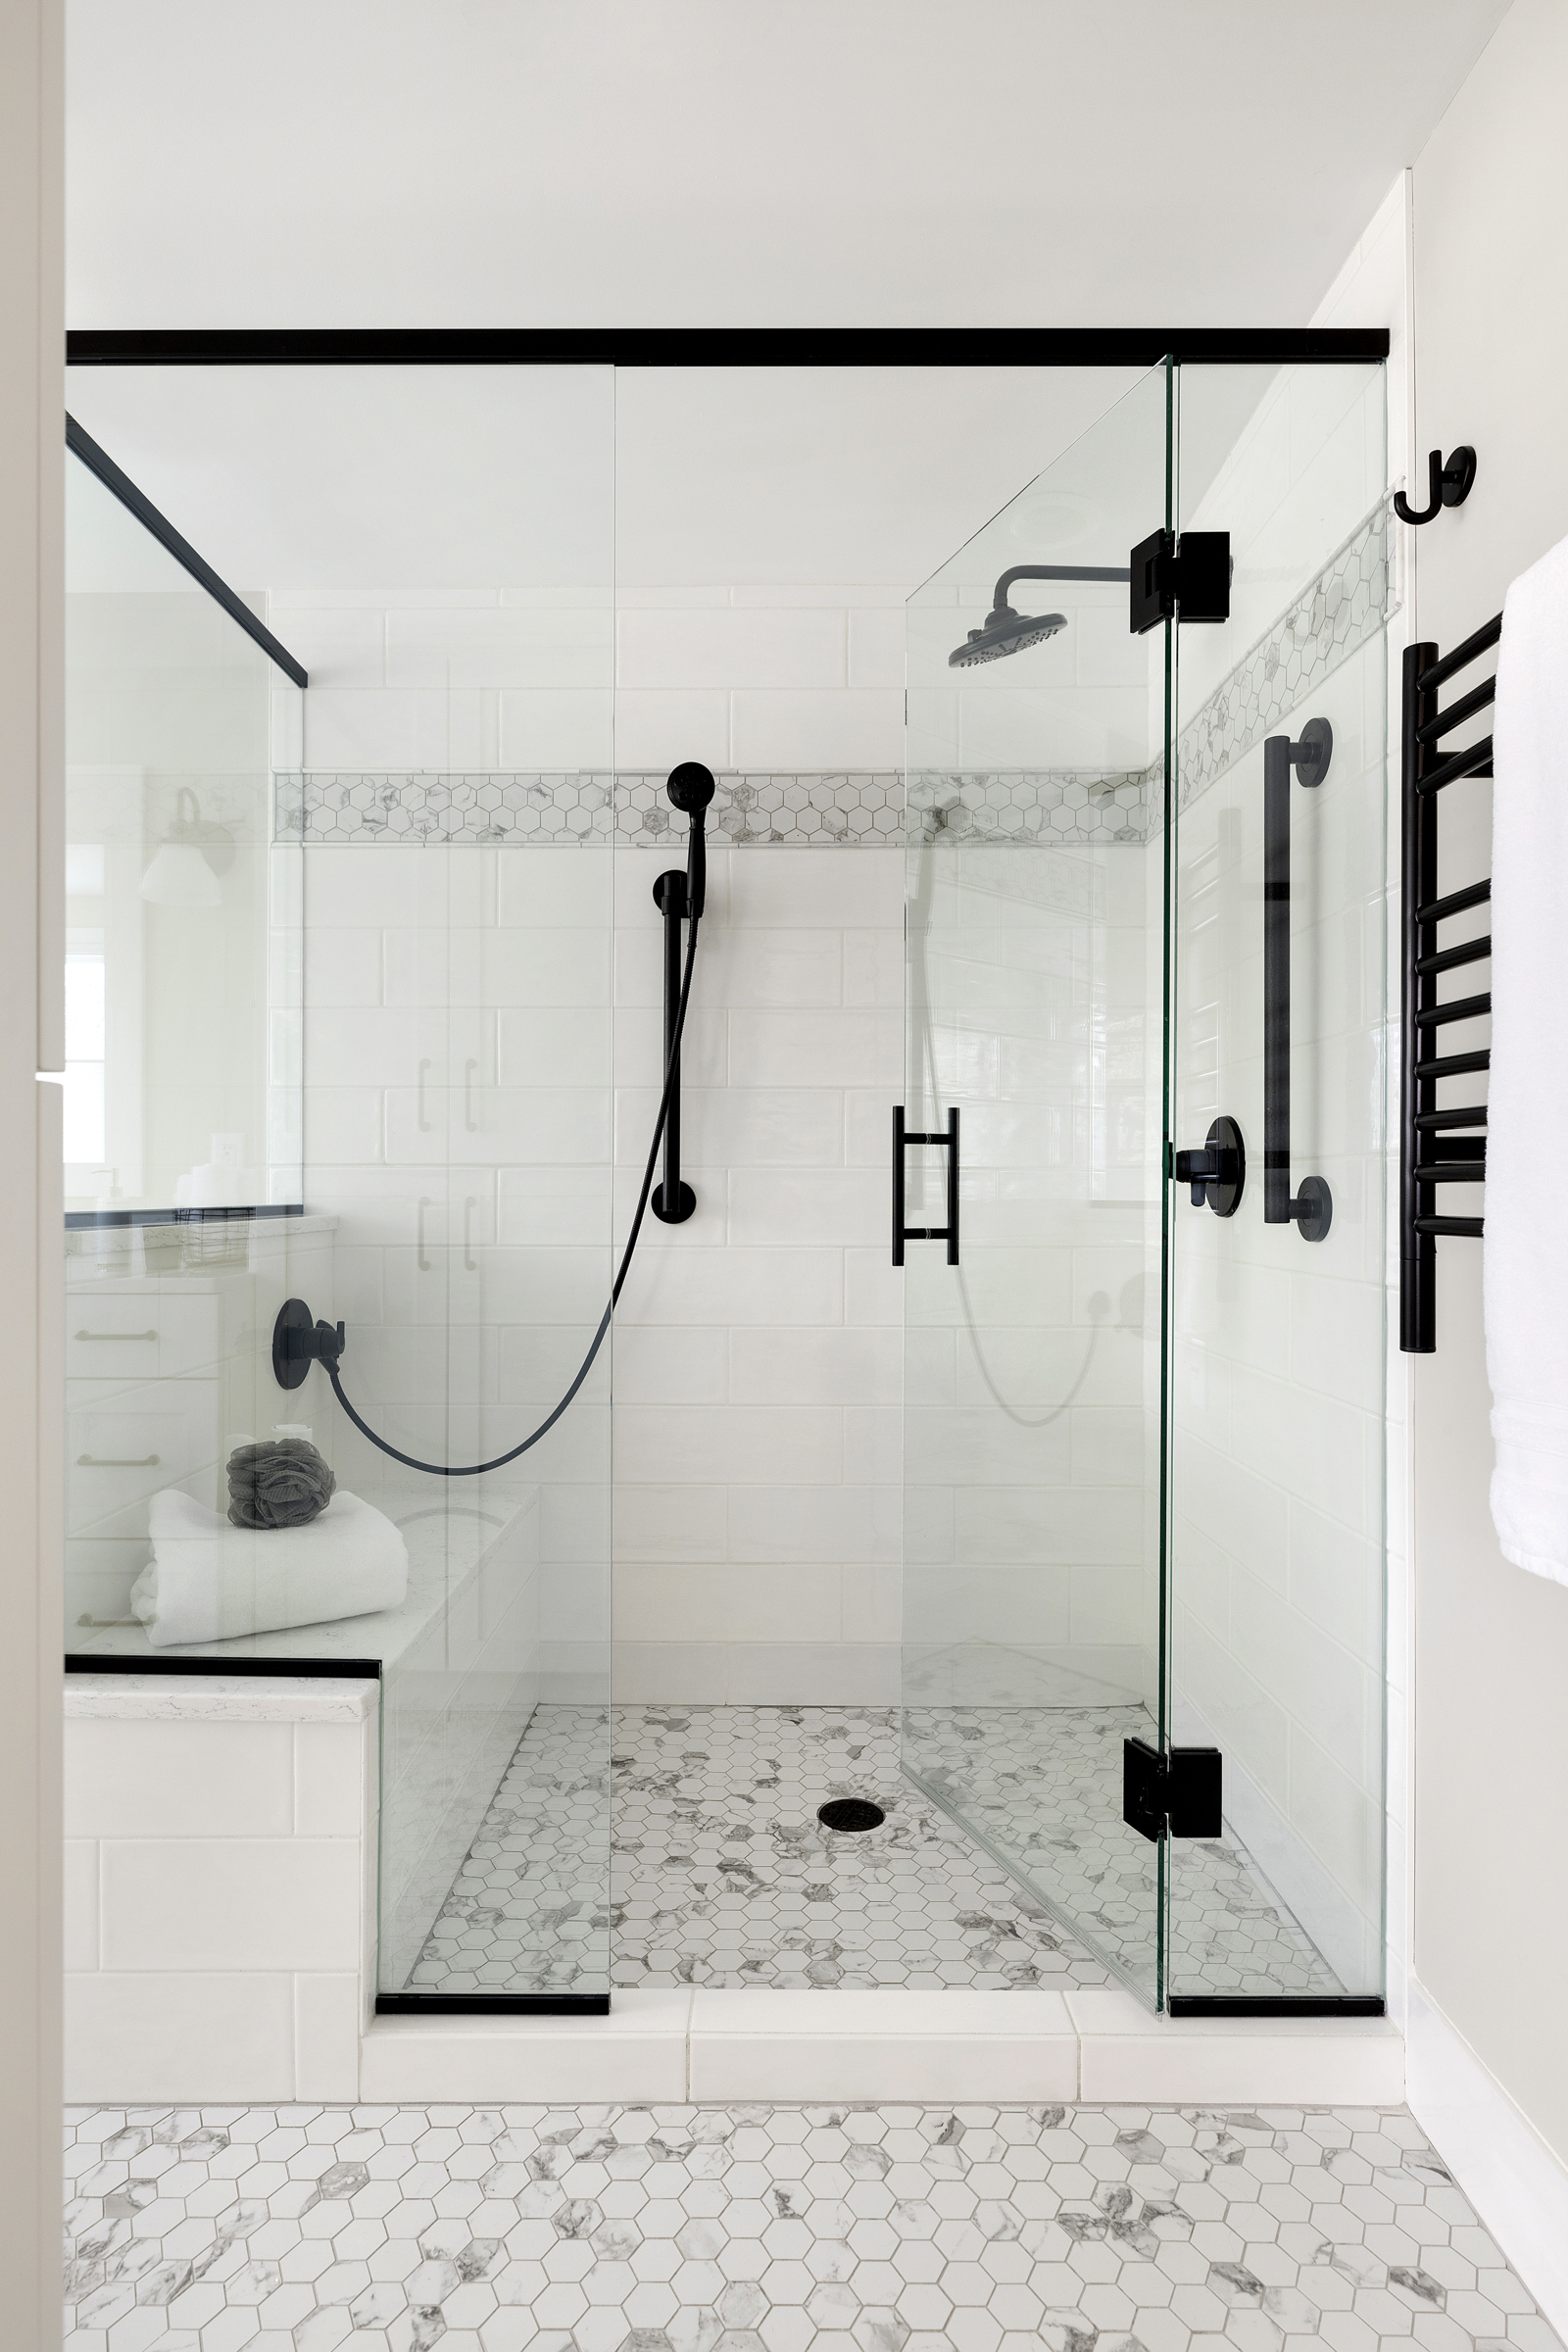 Bathroom renovation with walk in, glass enclosed shower with white marble tile, and black fixtures